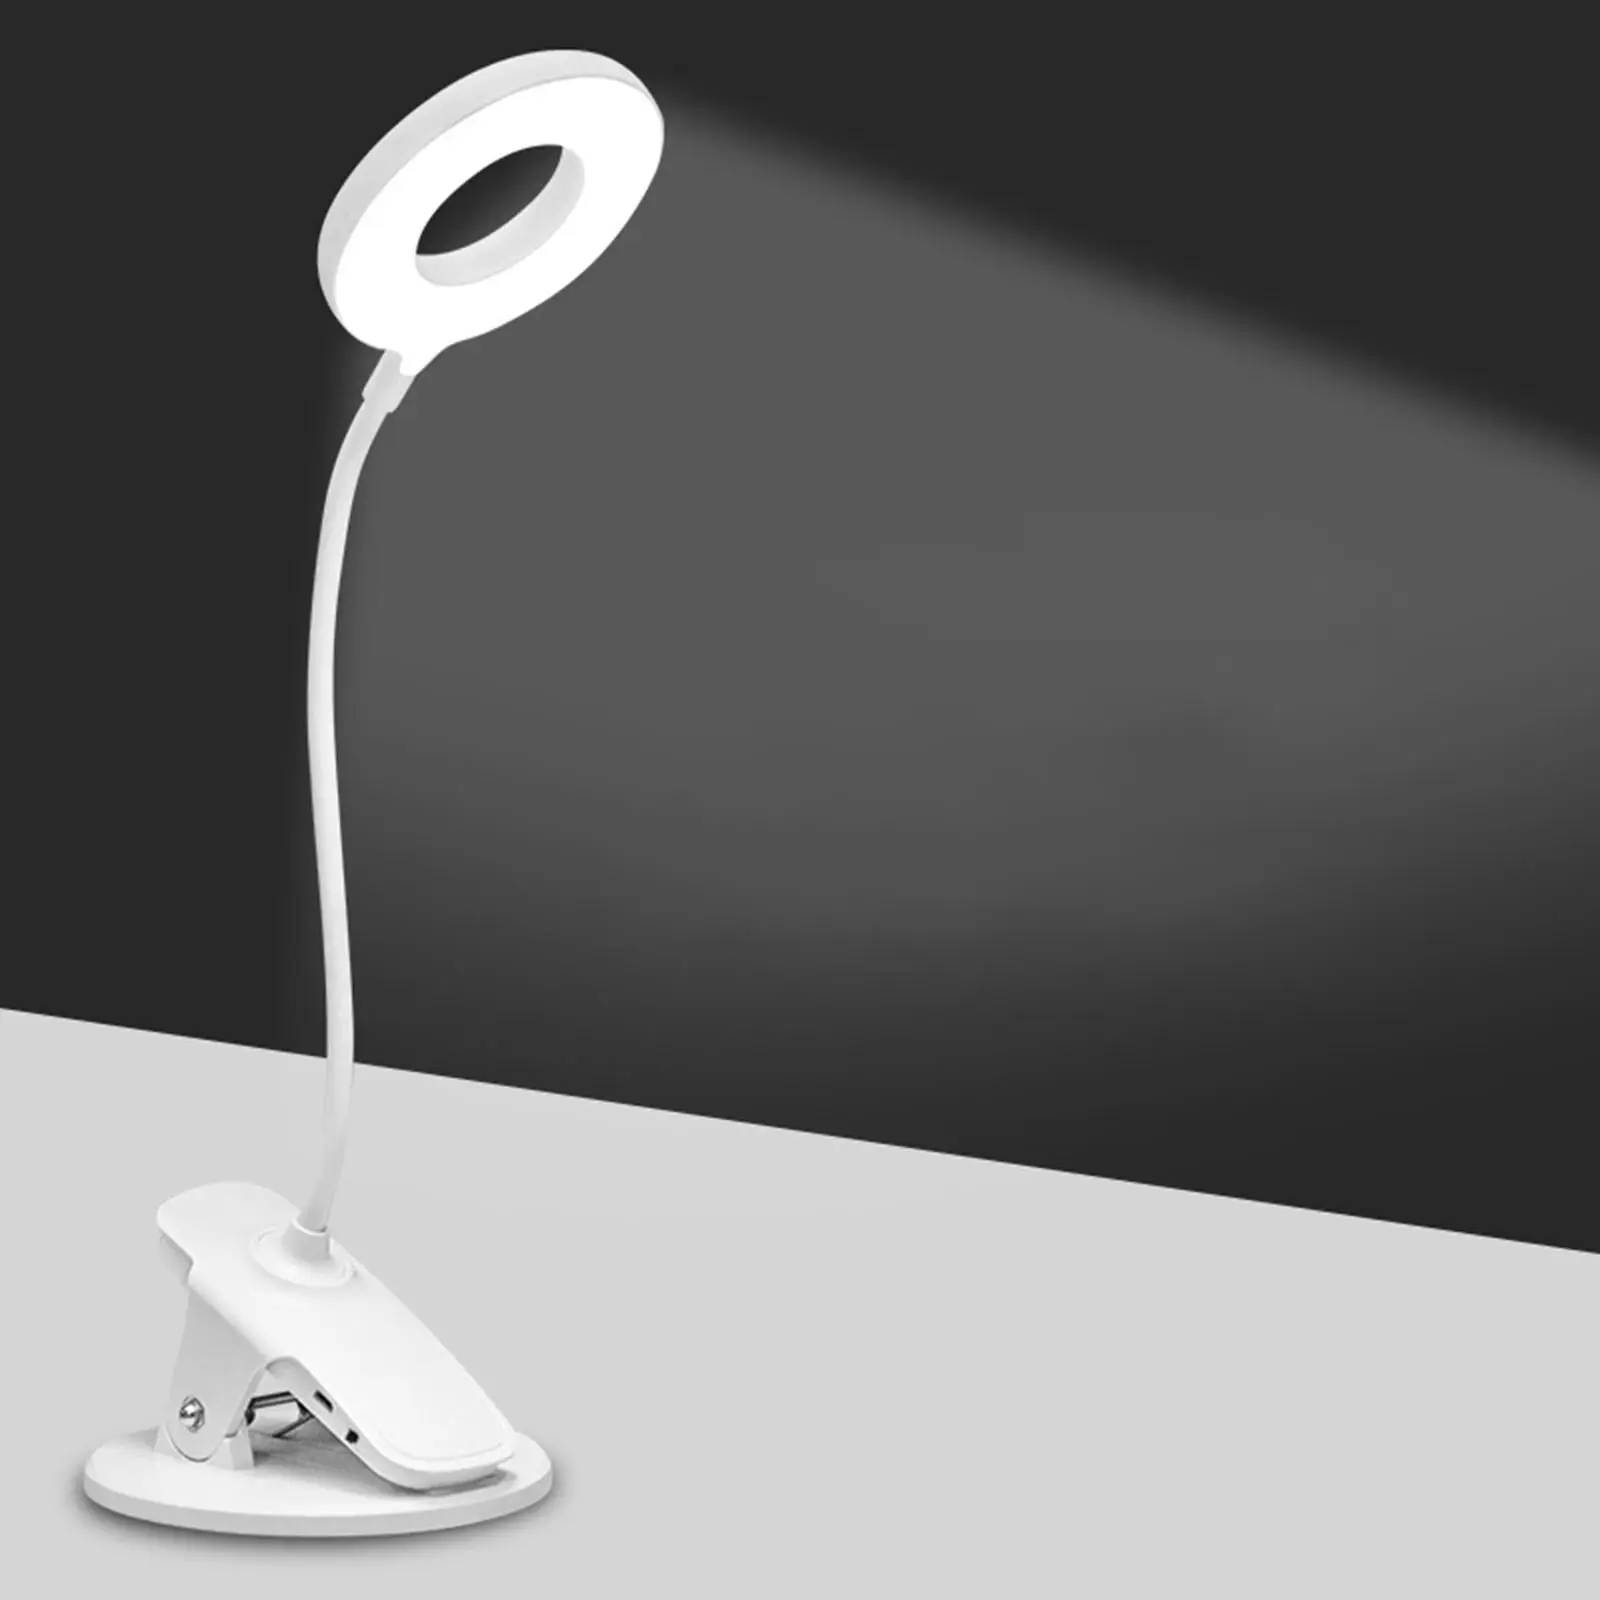 Adjustable Table Light Reading White LED Desk Lamp with Clamp for Headboard Home